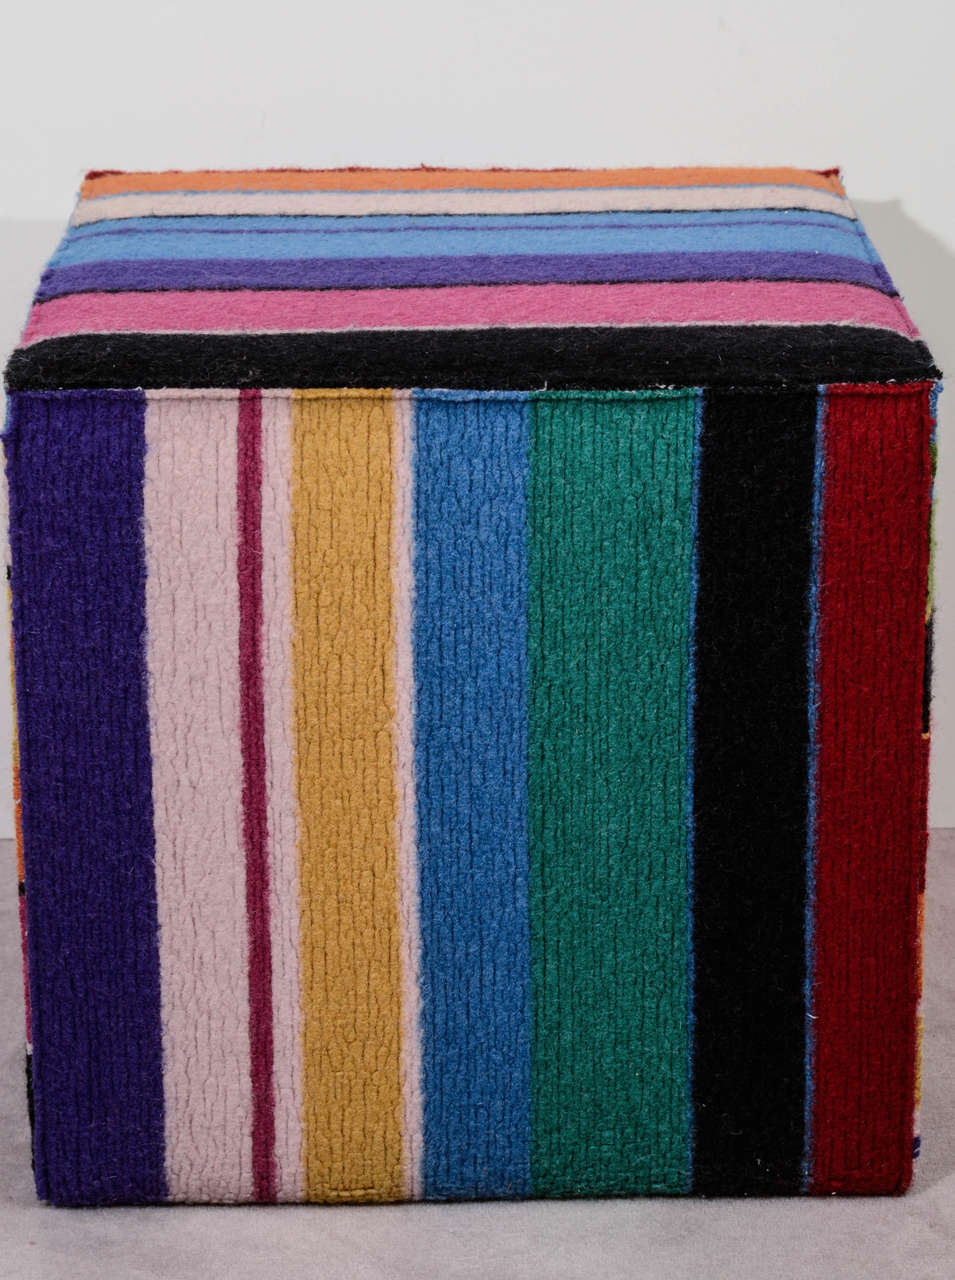 Italian Vintage Multi-Colored Cube Shaped Pouf by Missoni